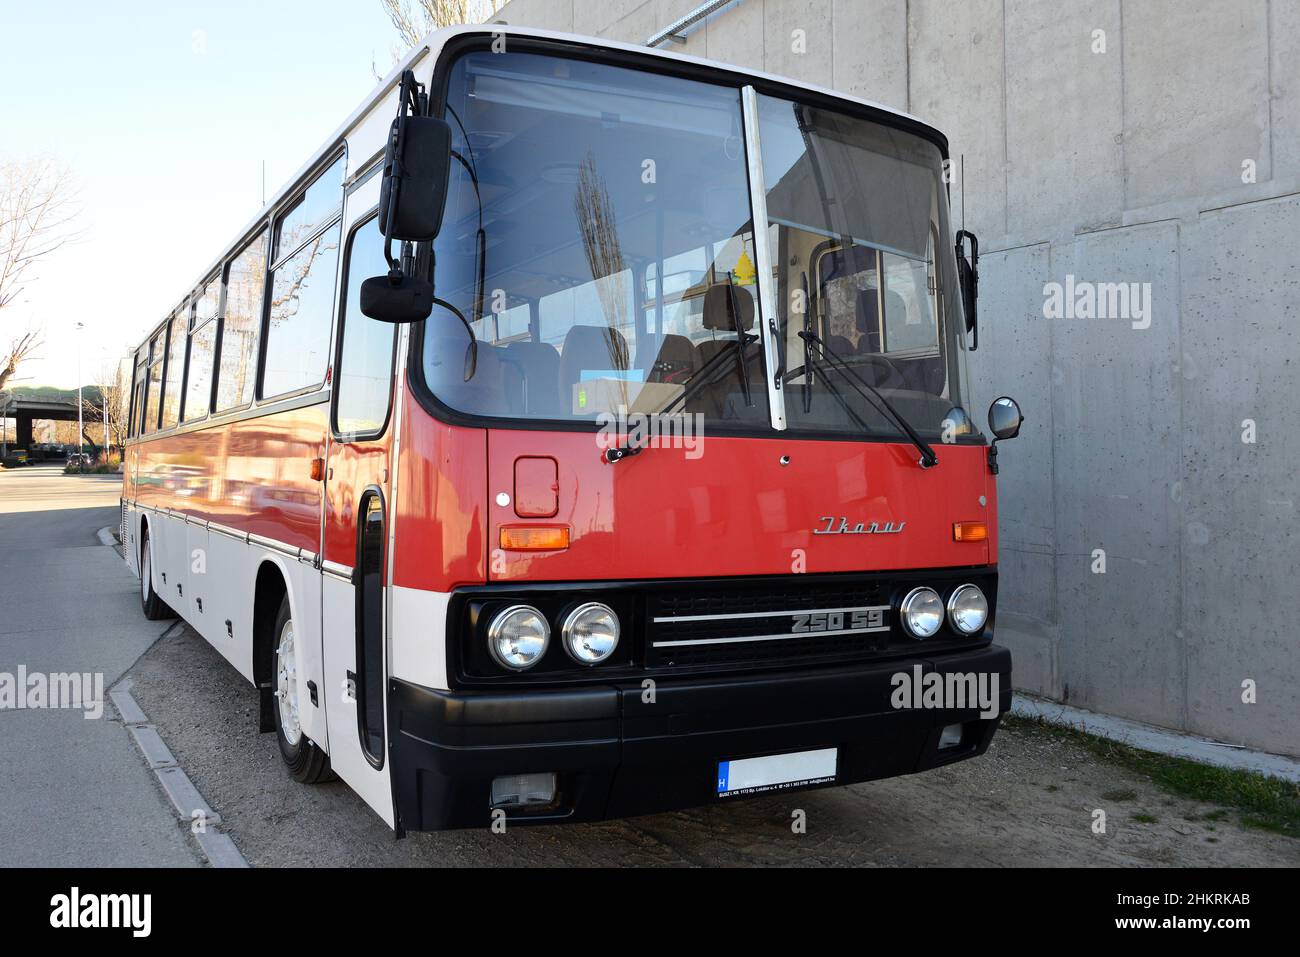 Budapest says goodbye to the iconic Ikarus bus